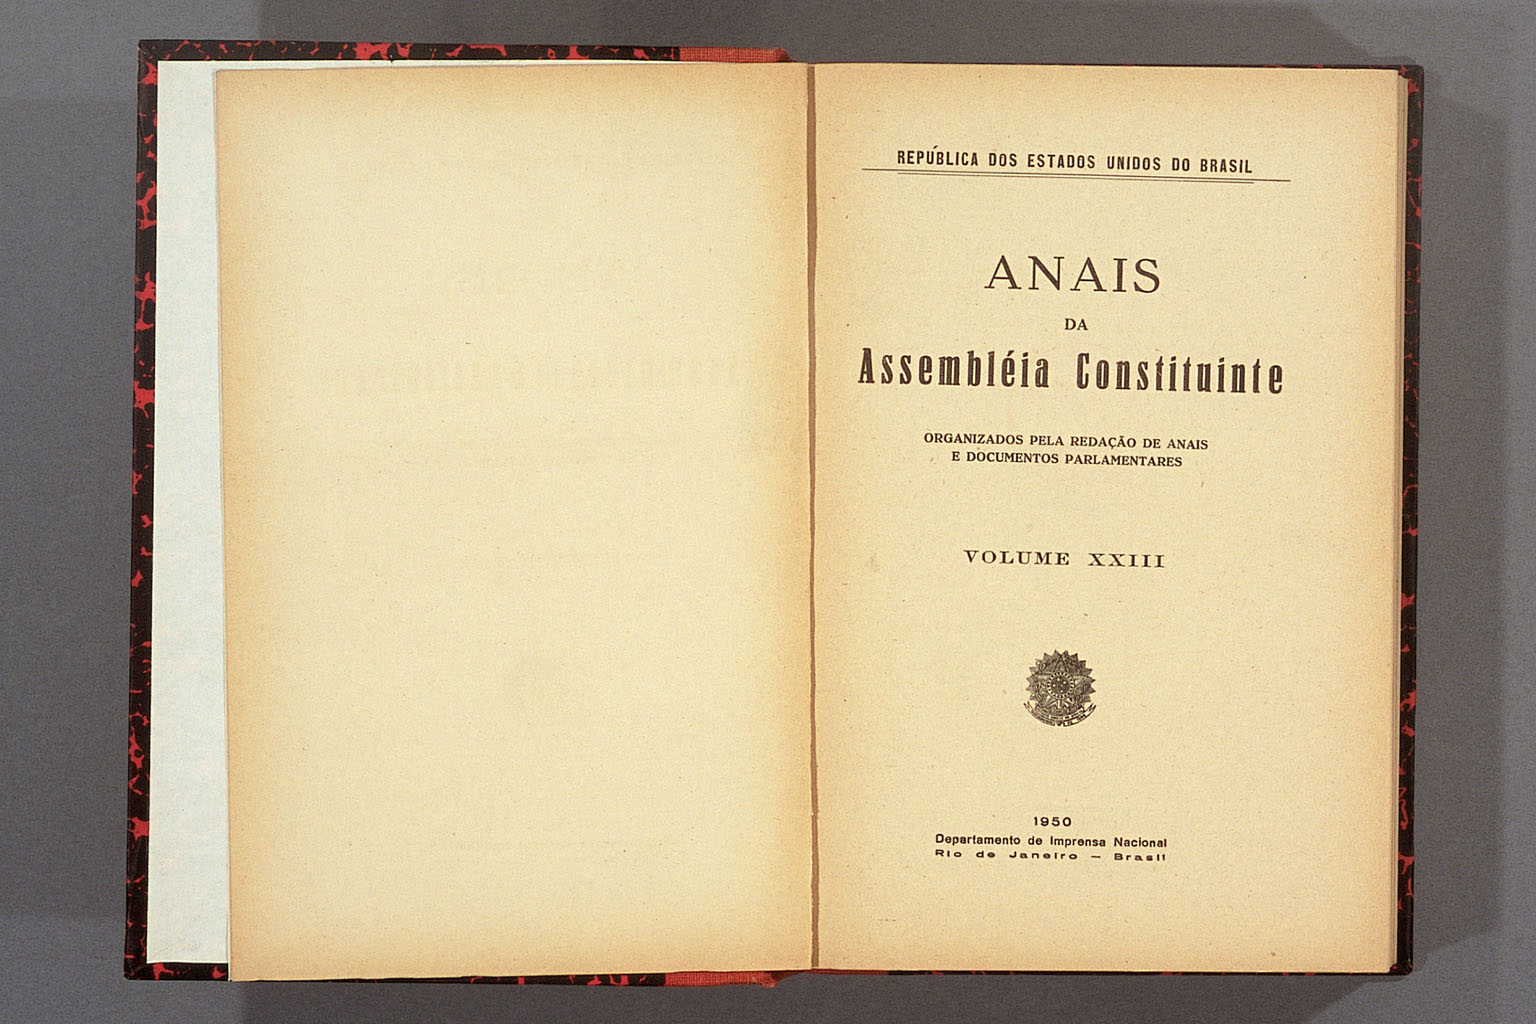 Image “Stenographic record of the Constituent Assembly”